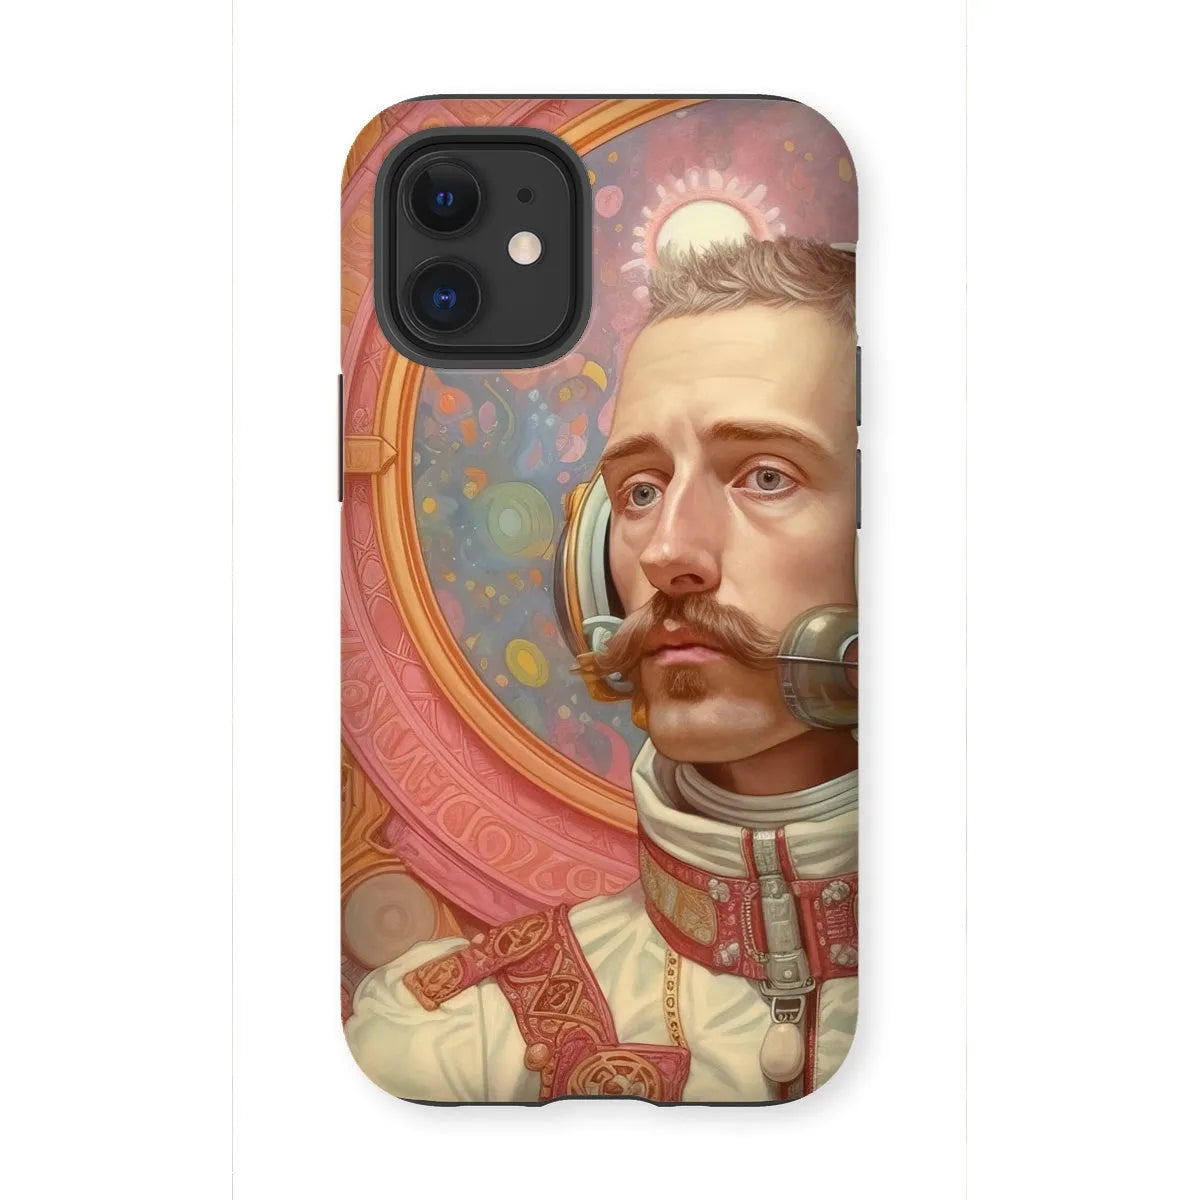 Axel The Gay Astronaut - Gay Aesthetic Art Phone Case - Iphone 12 Mini / Matte - Mobile Phone Cases - Aesthetic Art